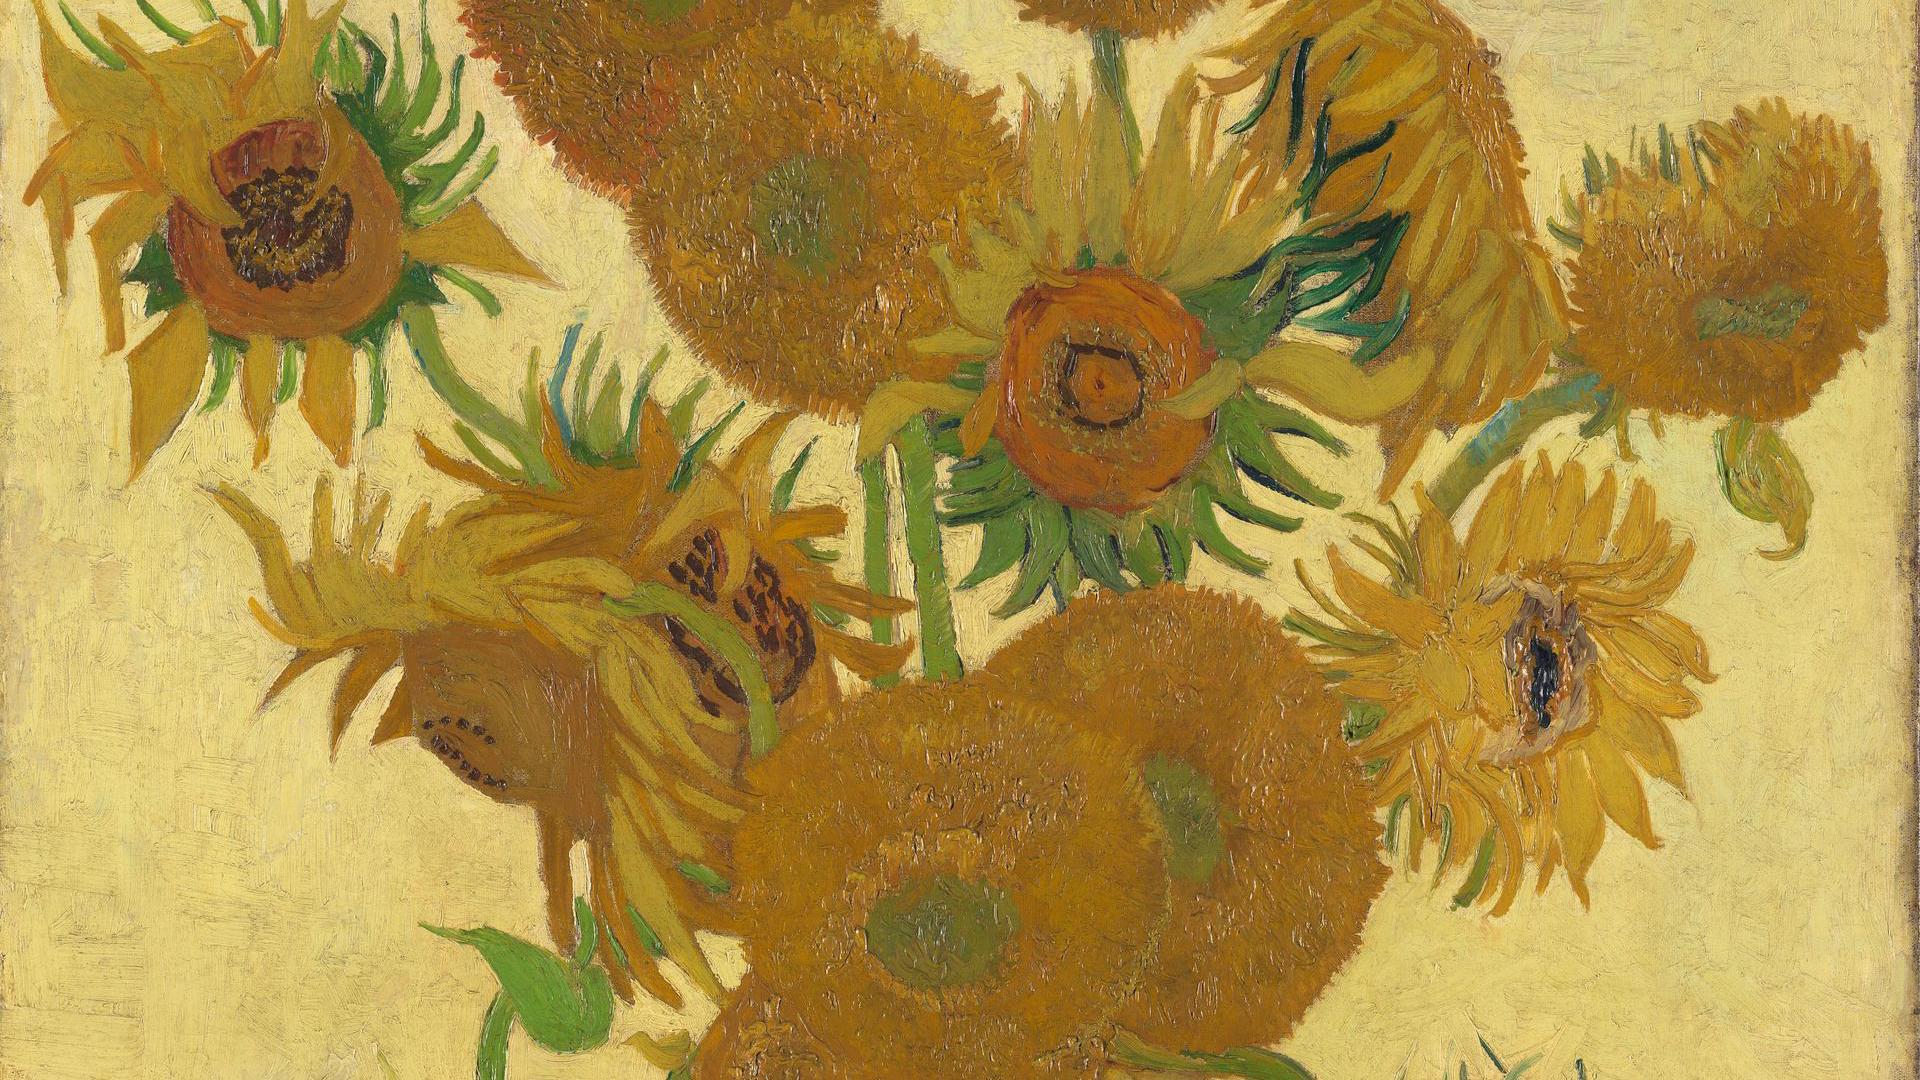 Vincent van Gogh. Sunflowers. NG3863. National Gallery, London